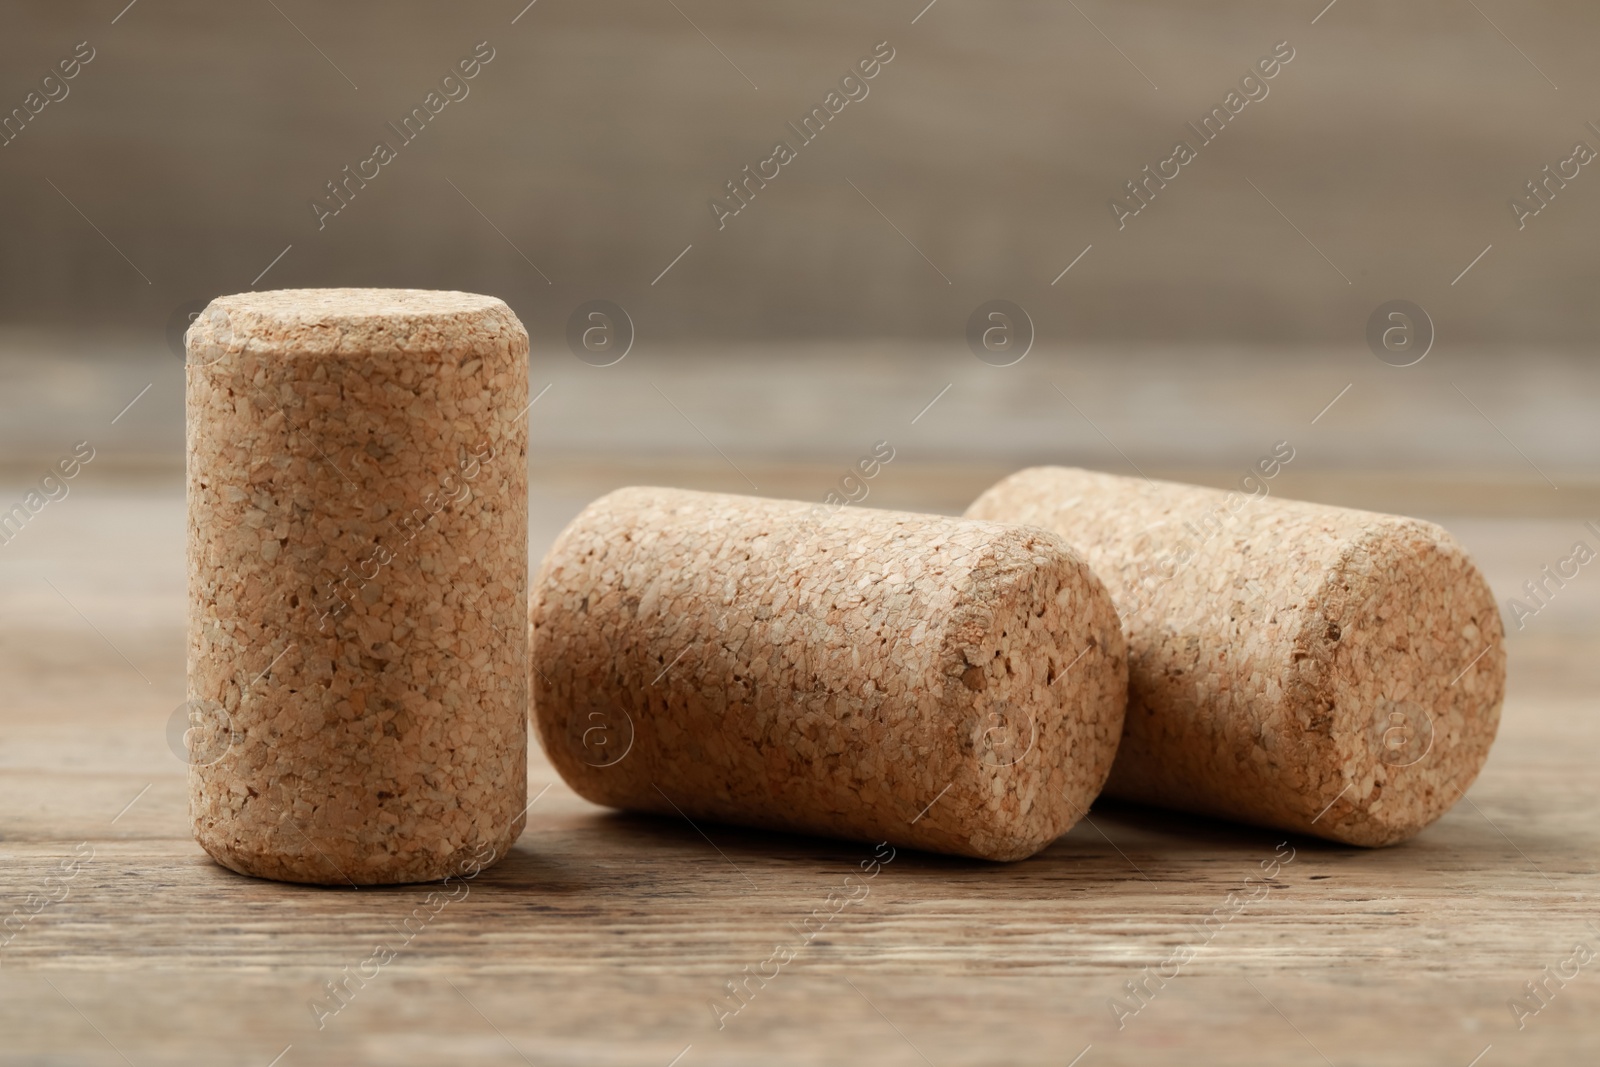 Photo of Corks of wine bottles on wooden table, closeup